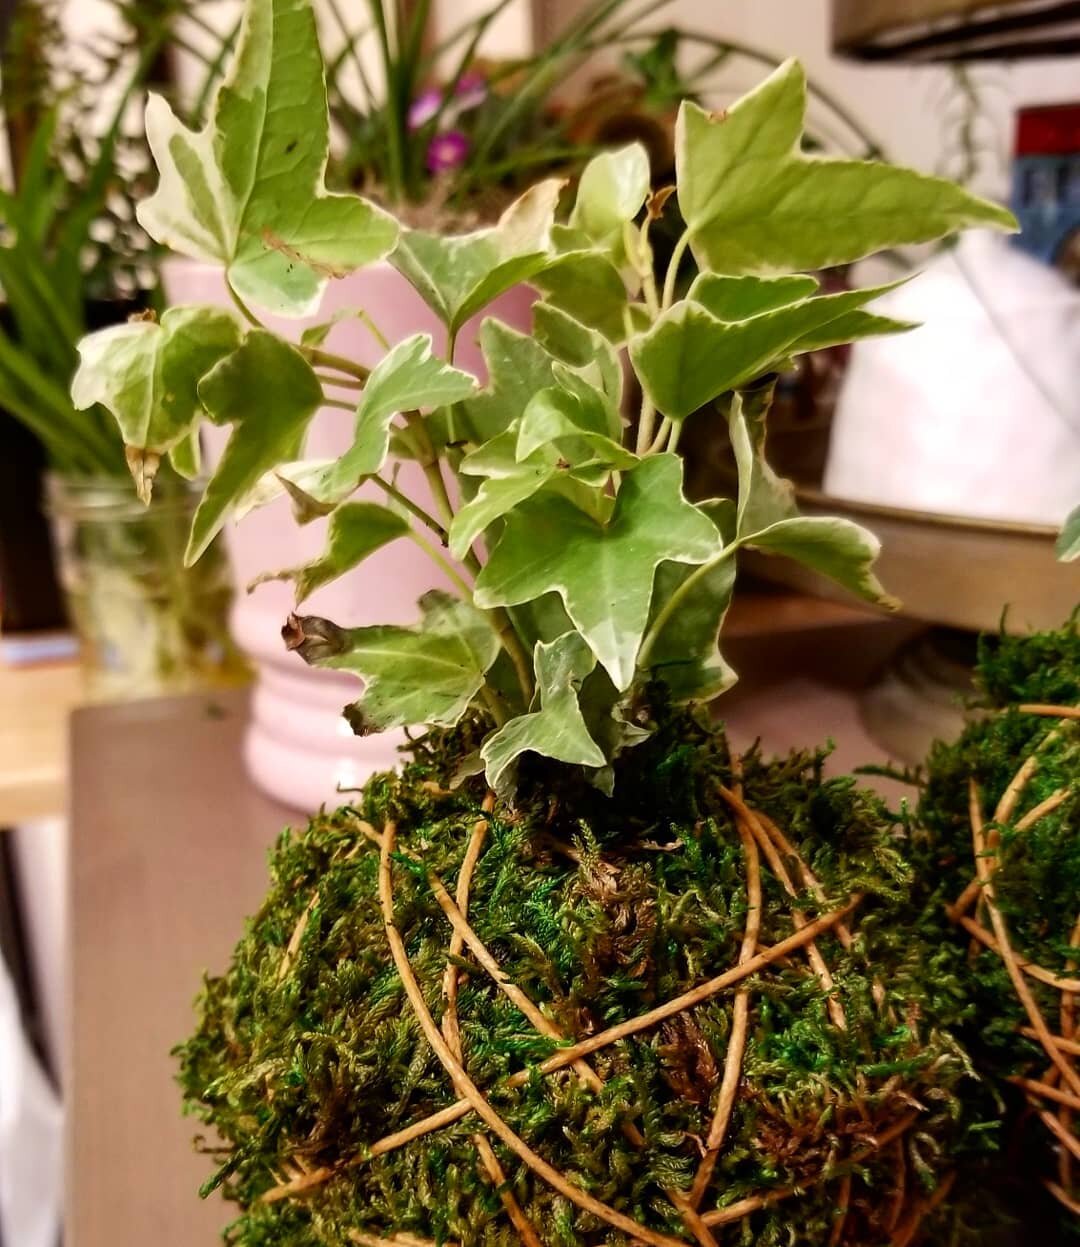 Joy trigger alert! Met up with the ladies of the Craft Co-op today and tried a new thing, #kokedama. 
Crafternoons. Lady friends. Plants. Today was a good day.

#plantmom #houseplants #crafternoon #seekjoy